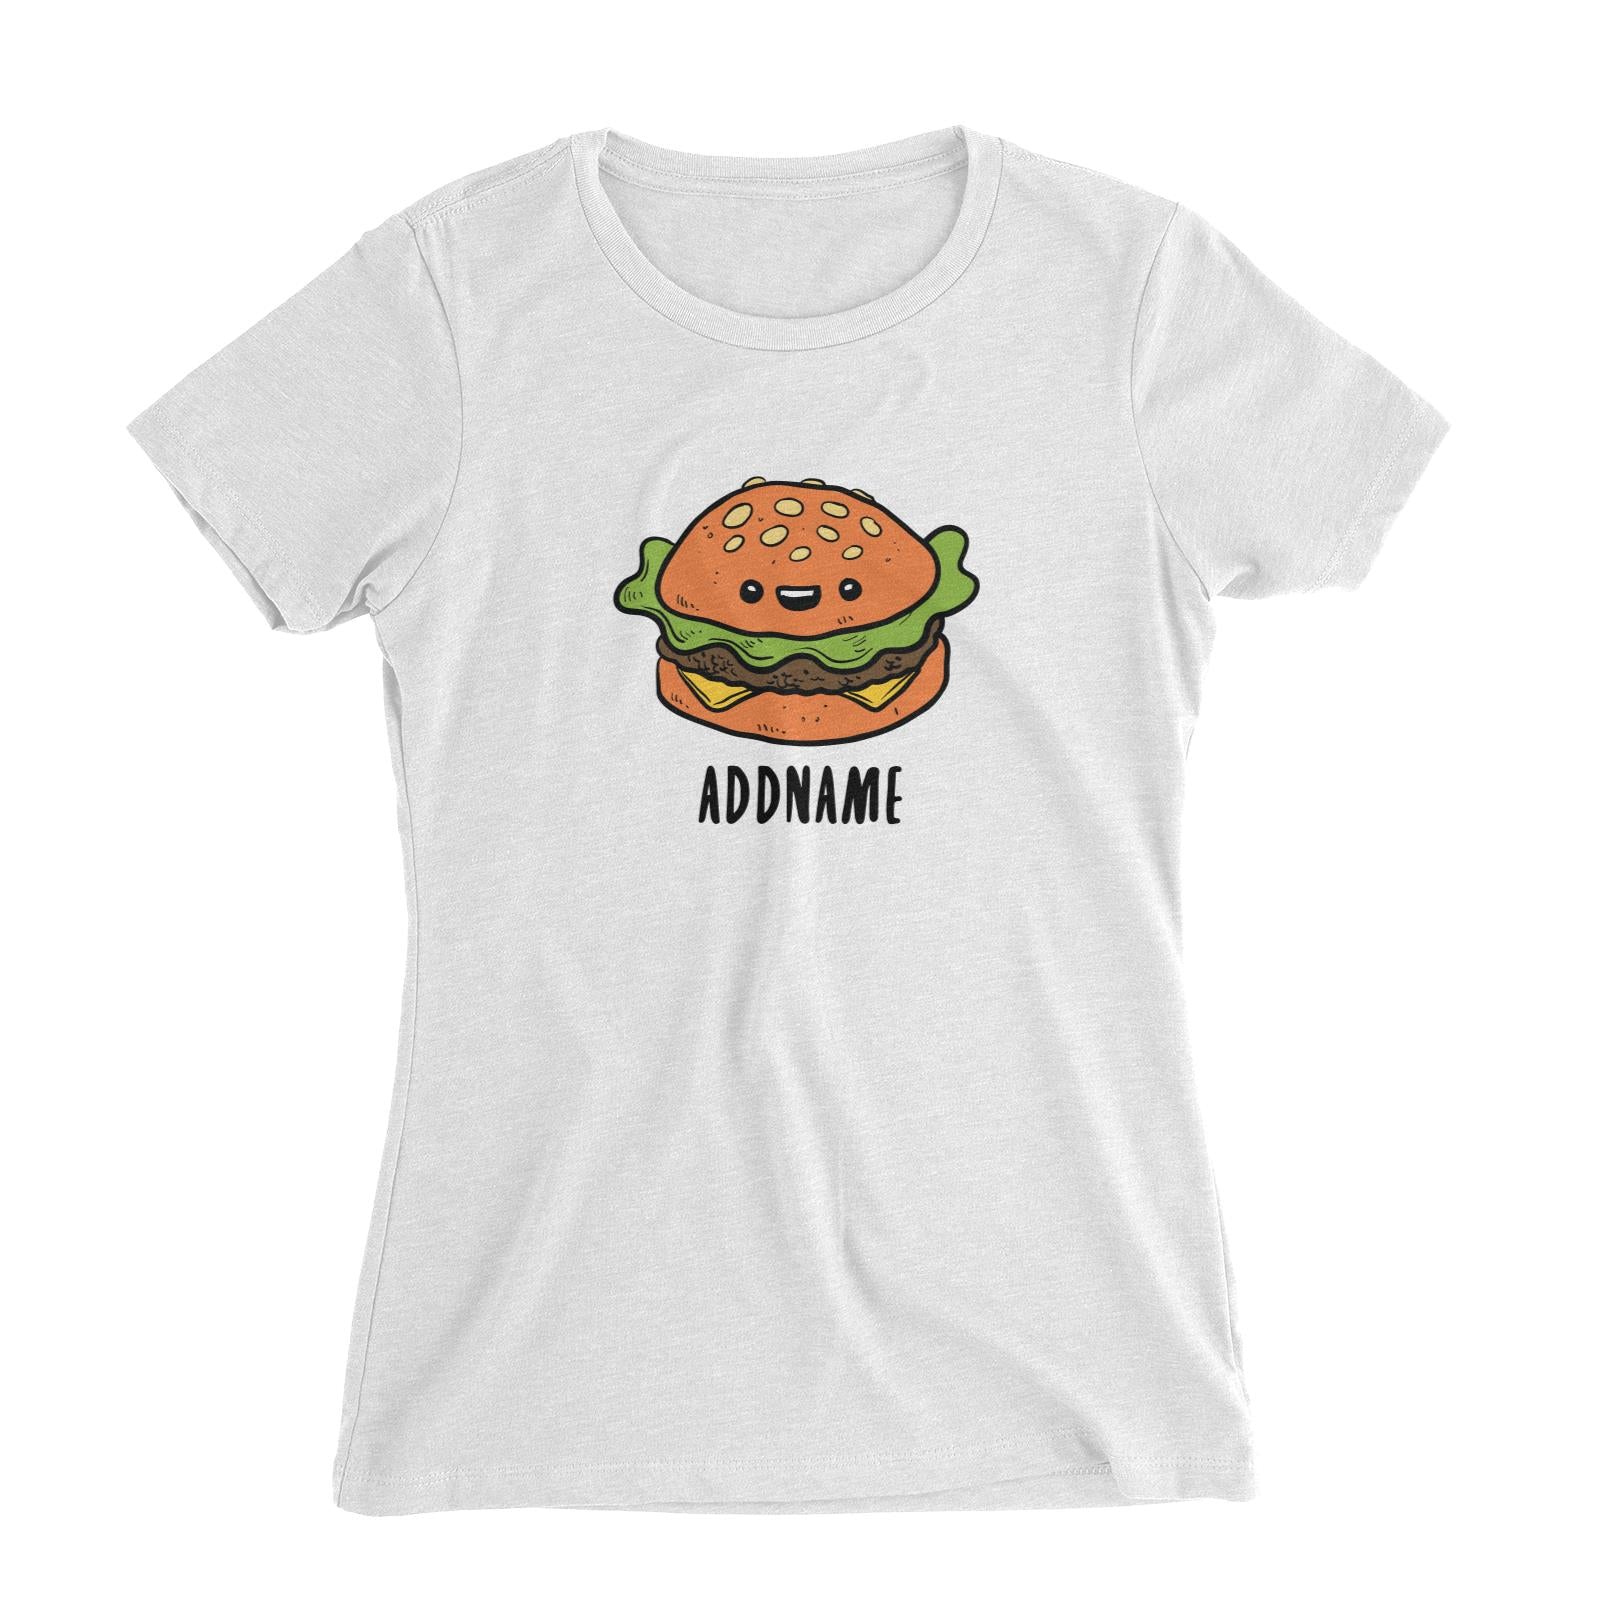 Fast Food Burger Addname Women's Slim Fit T-Shirt  Matching Family Comic Cartoon Personalizable Designs